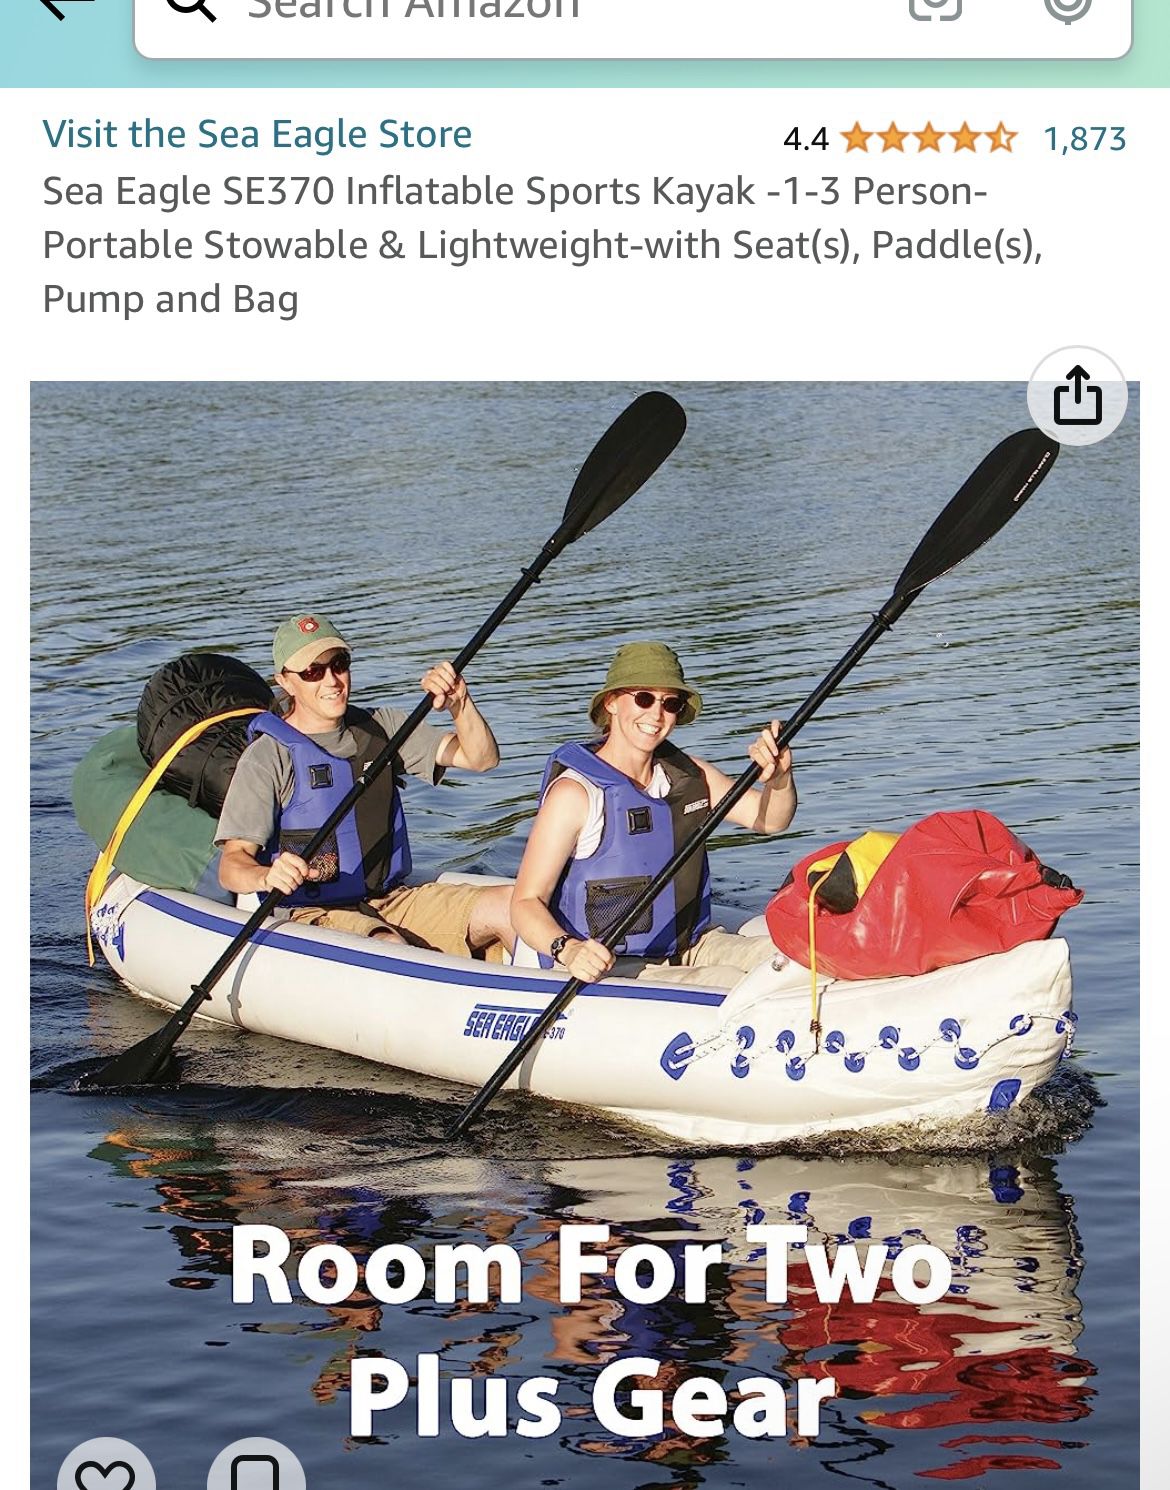 Sea Eagle SE370 Inflatable Sports Kayak -1-3 Person-Portable Stowable &  Lightweight-with Seat(s), Paddle(s), Pump and Bag